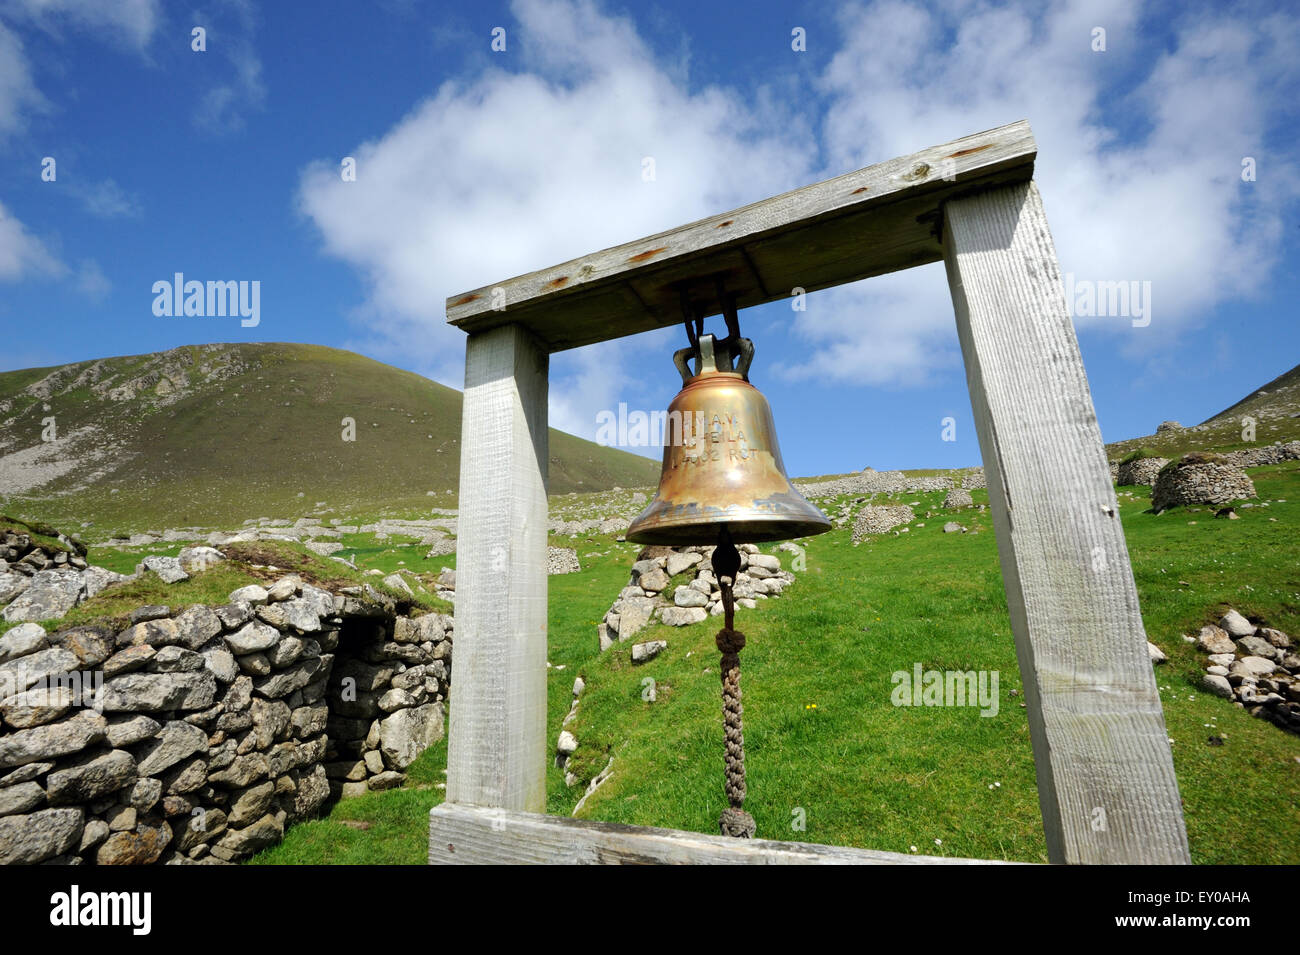 The ship's bell of HMAV Aghelia in the Street. Stock Photo